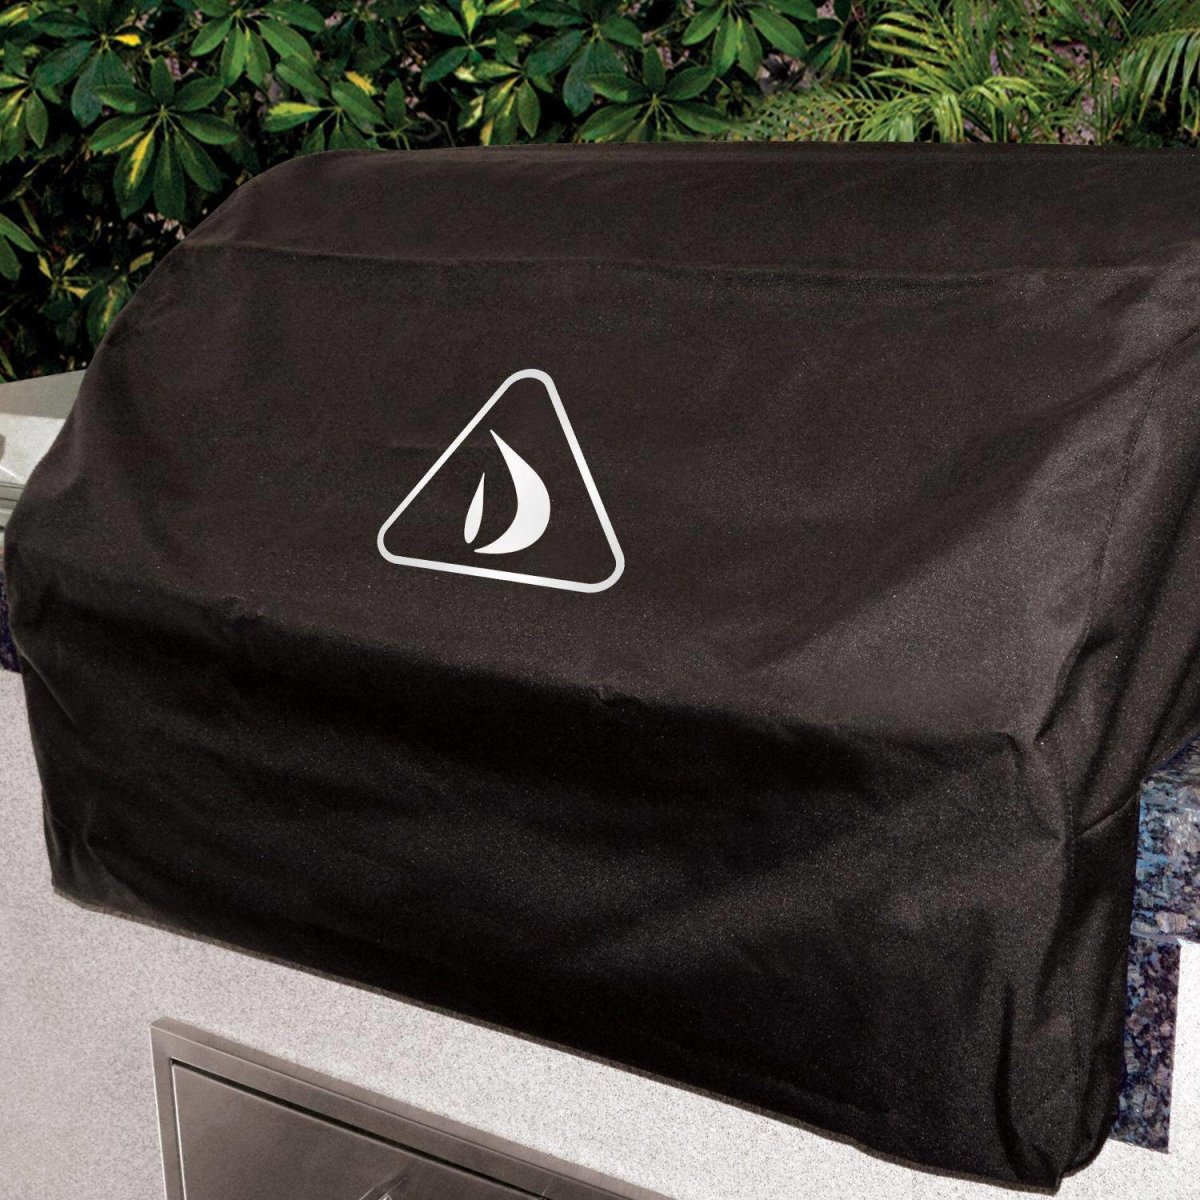 Delta Heat Grill Cover For 38-Inch Built-In Grill - VCBQ38-C - Texas Star Grill Shop VCBQ38-C